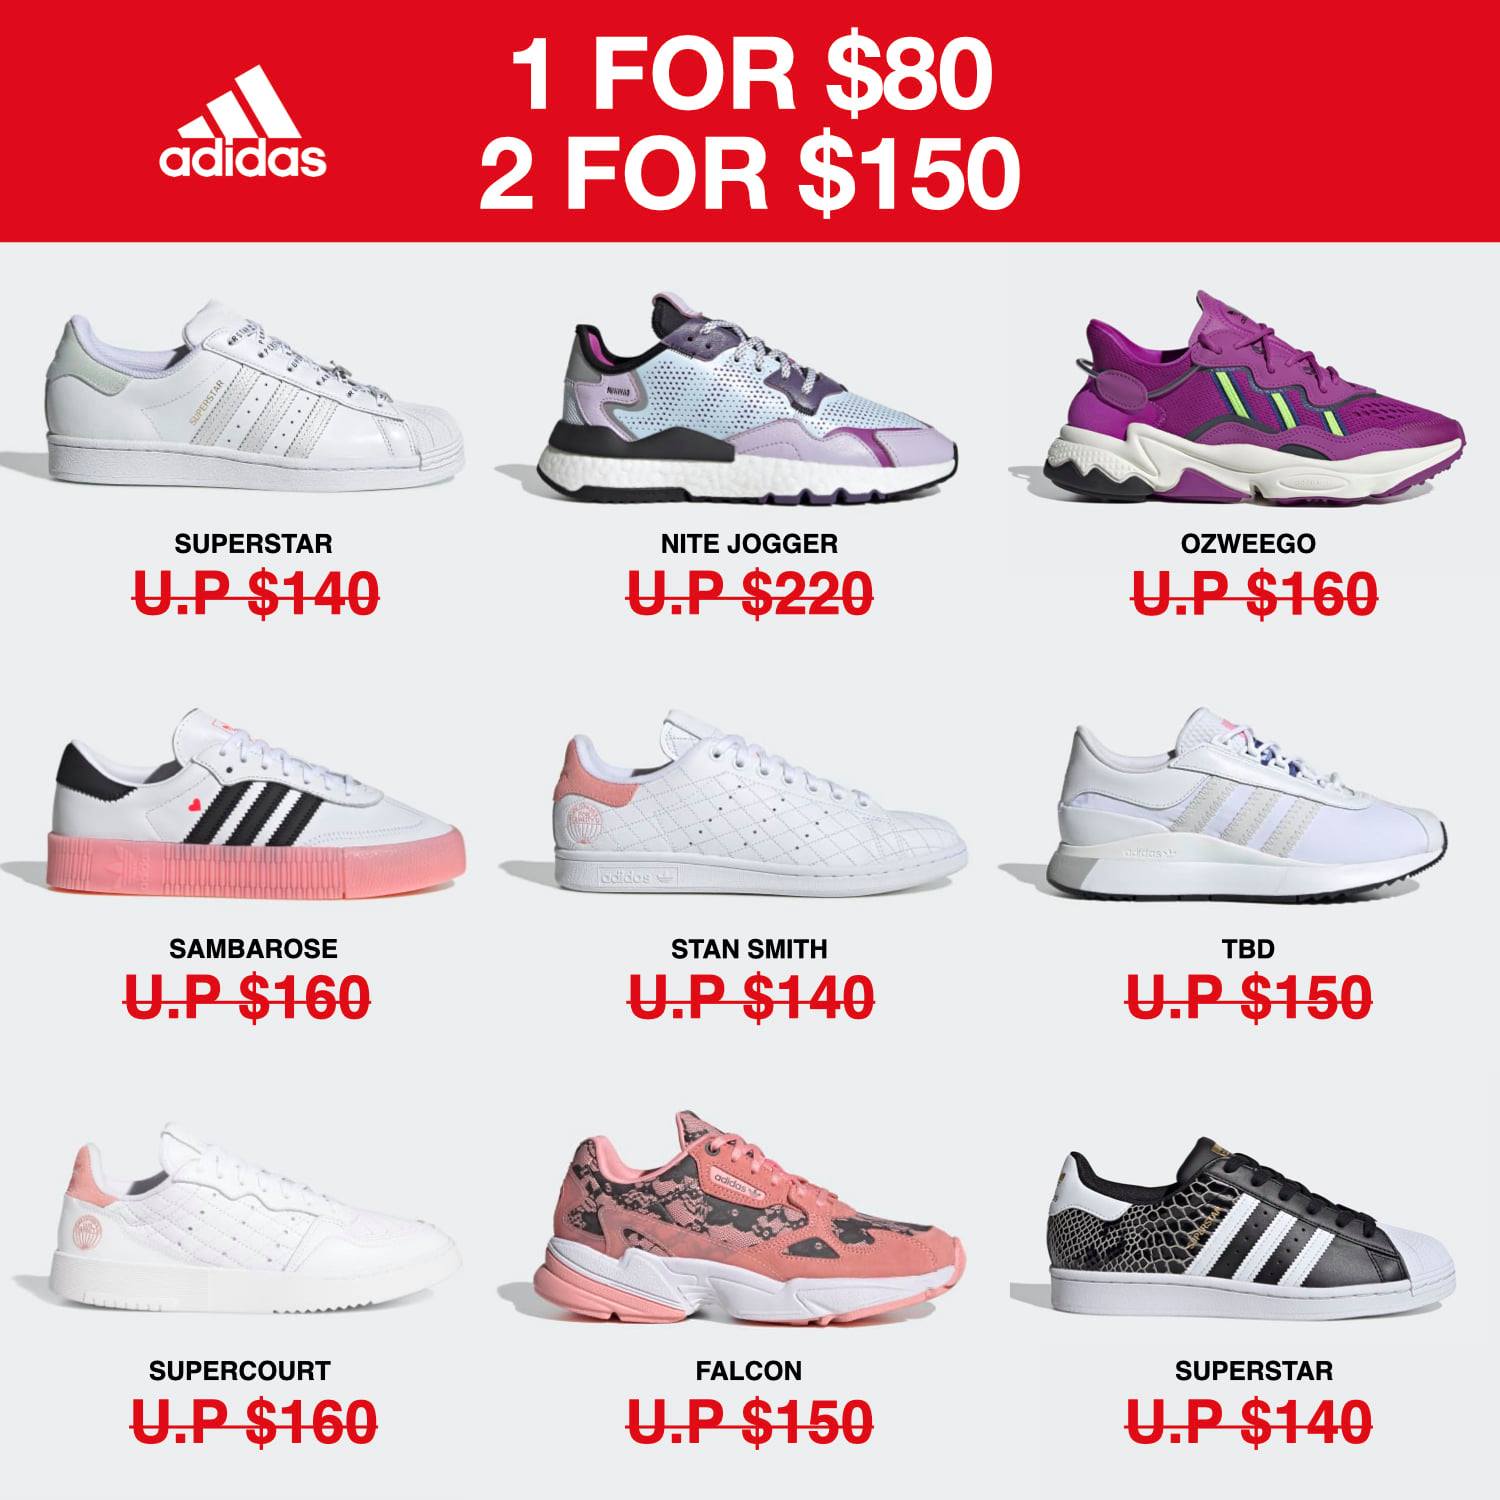 nike and adidas shoes sale